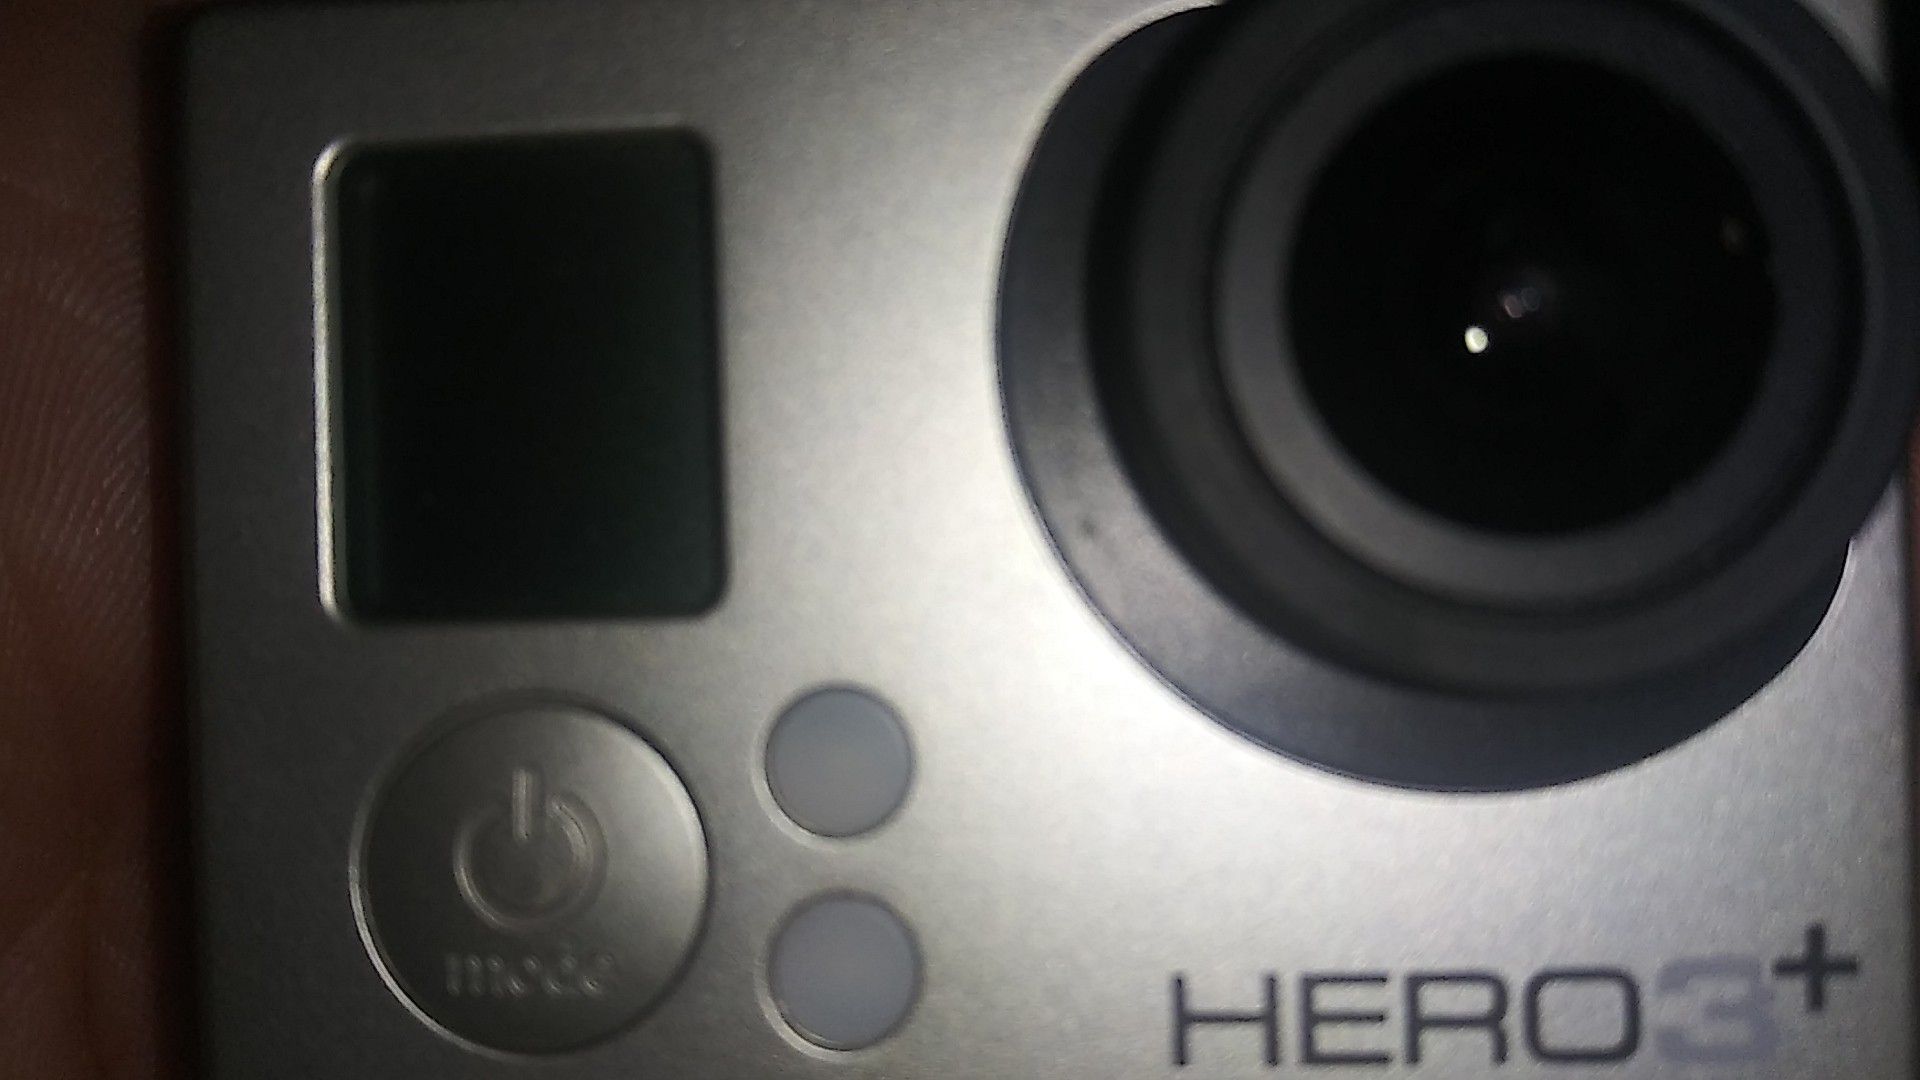 HERO 3+ camera comes witj charger and hard case for it and 128 G B. Sd card